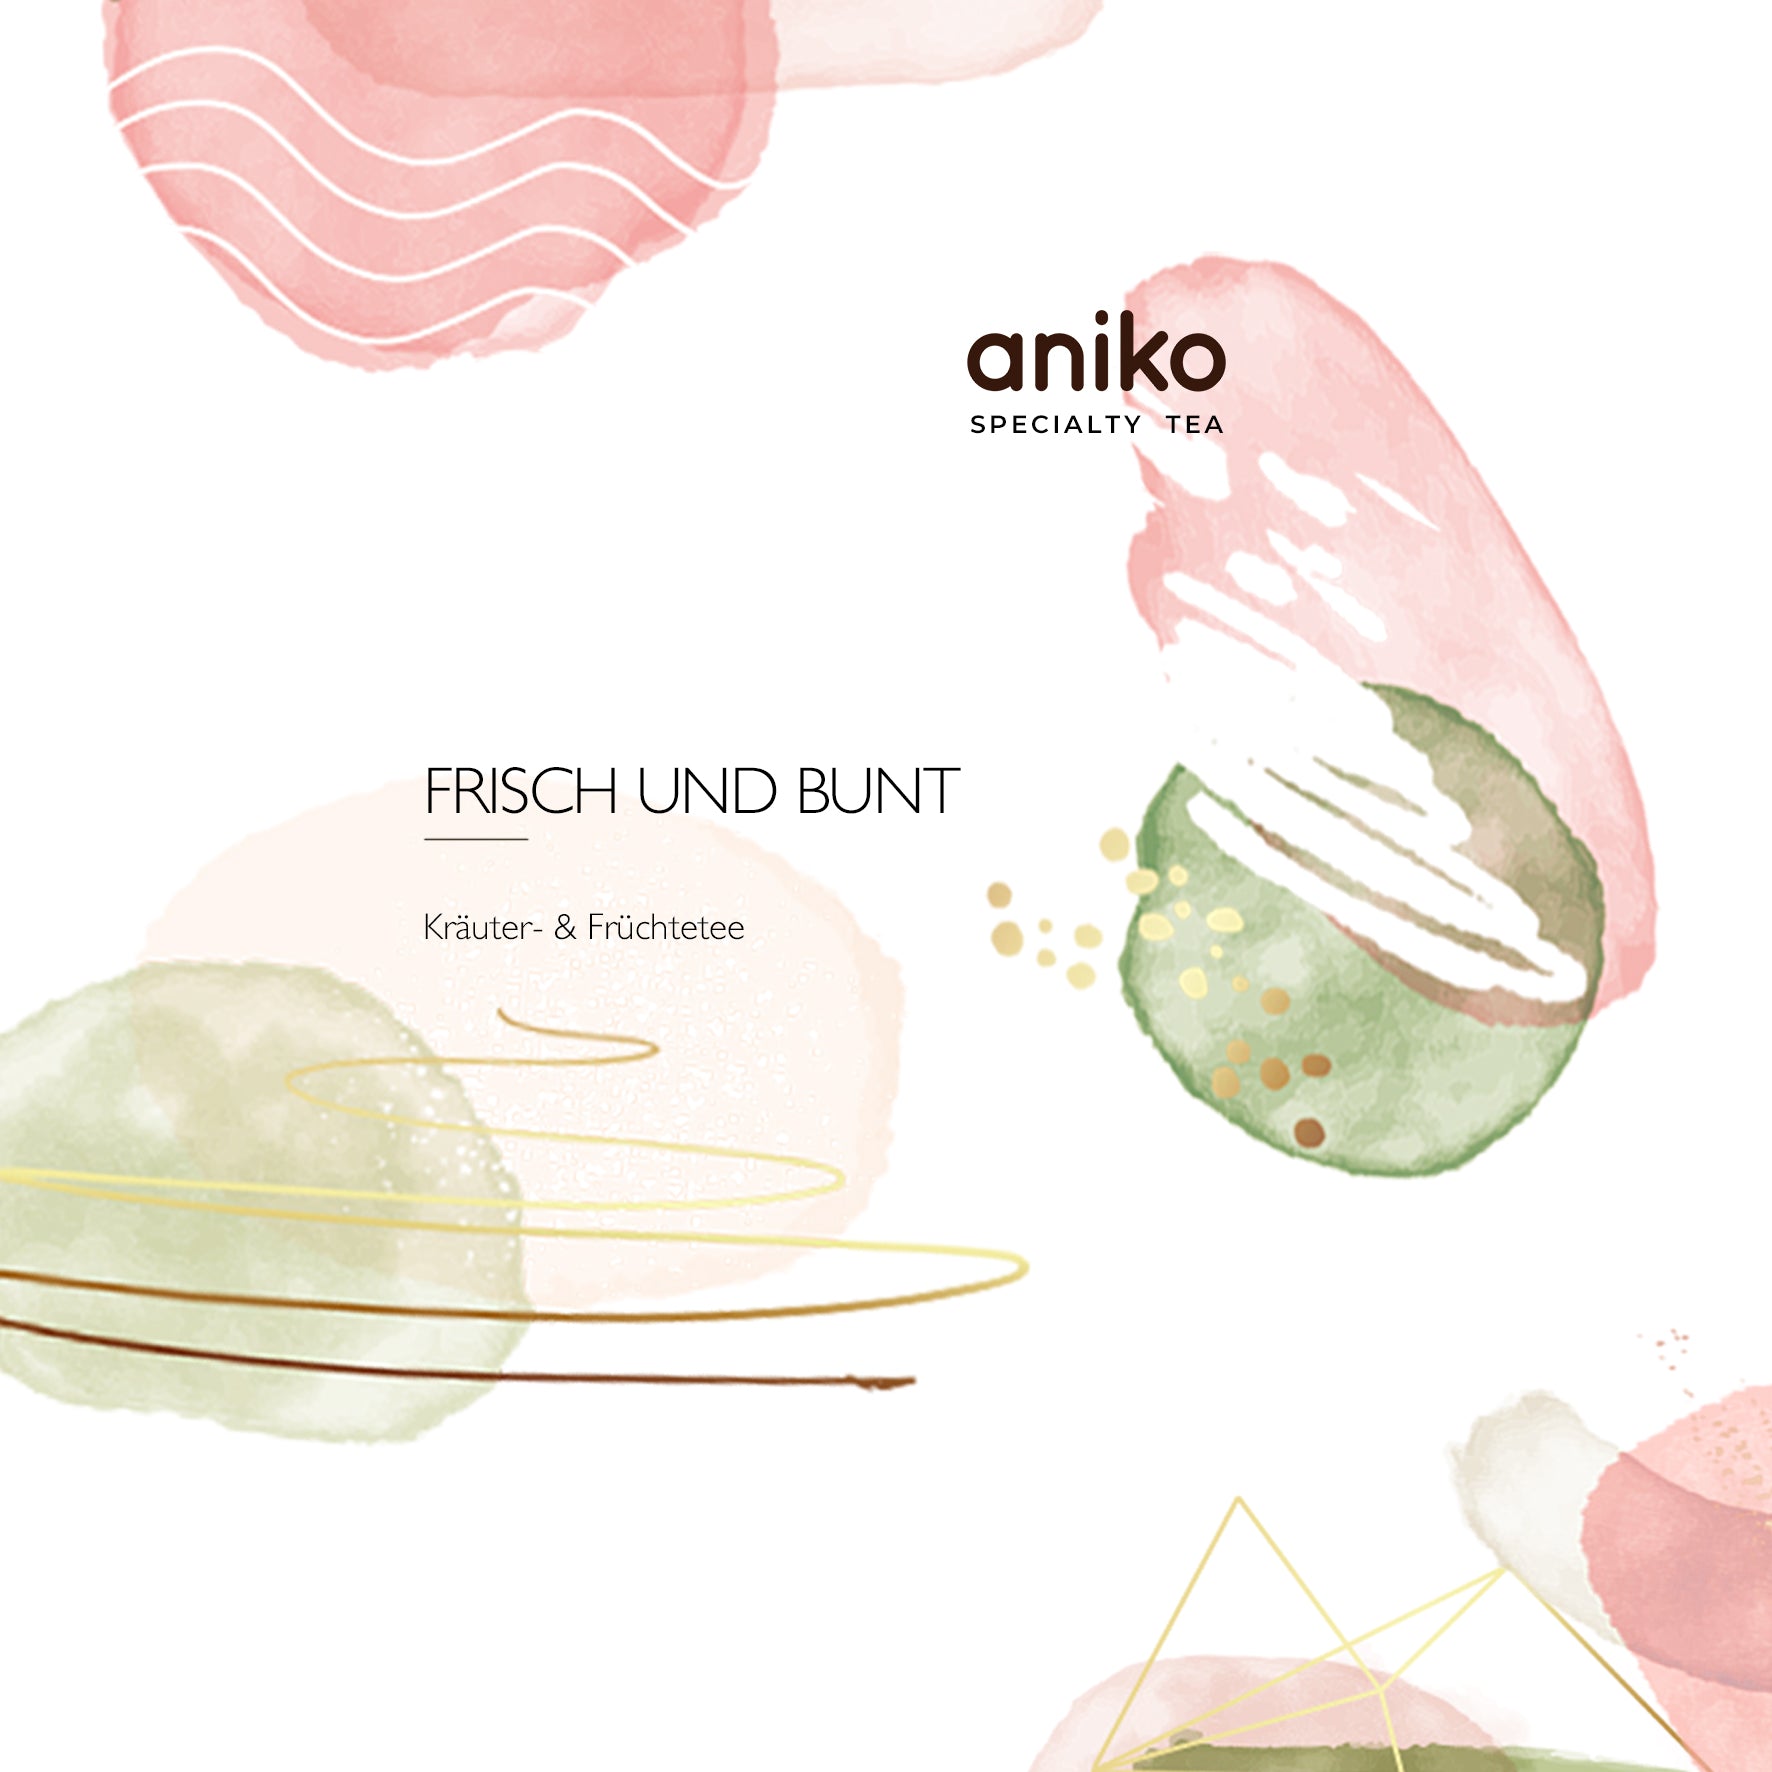 aniko Specialty Tea I Fresh and colorful